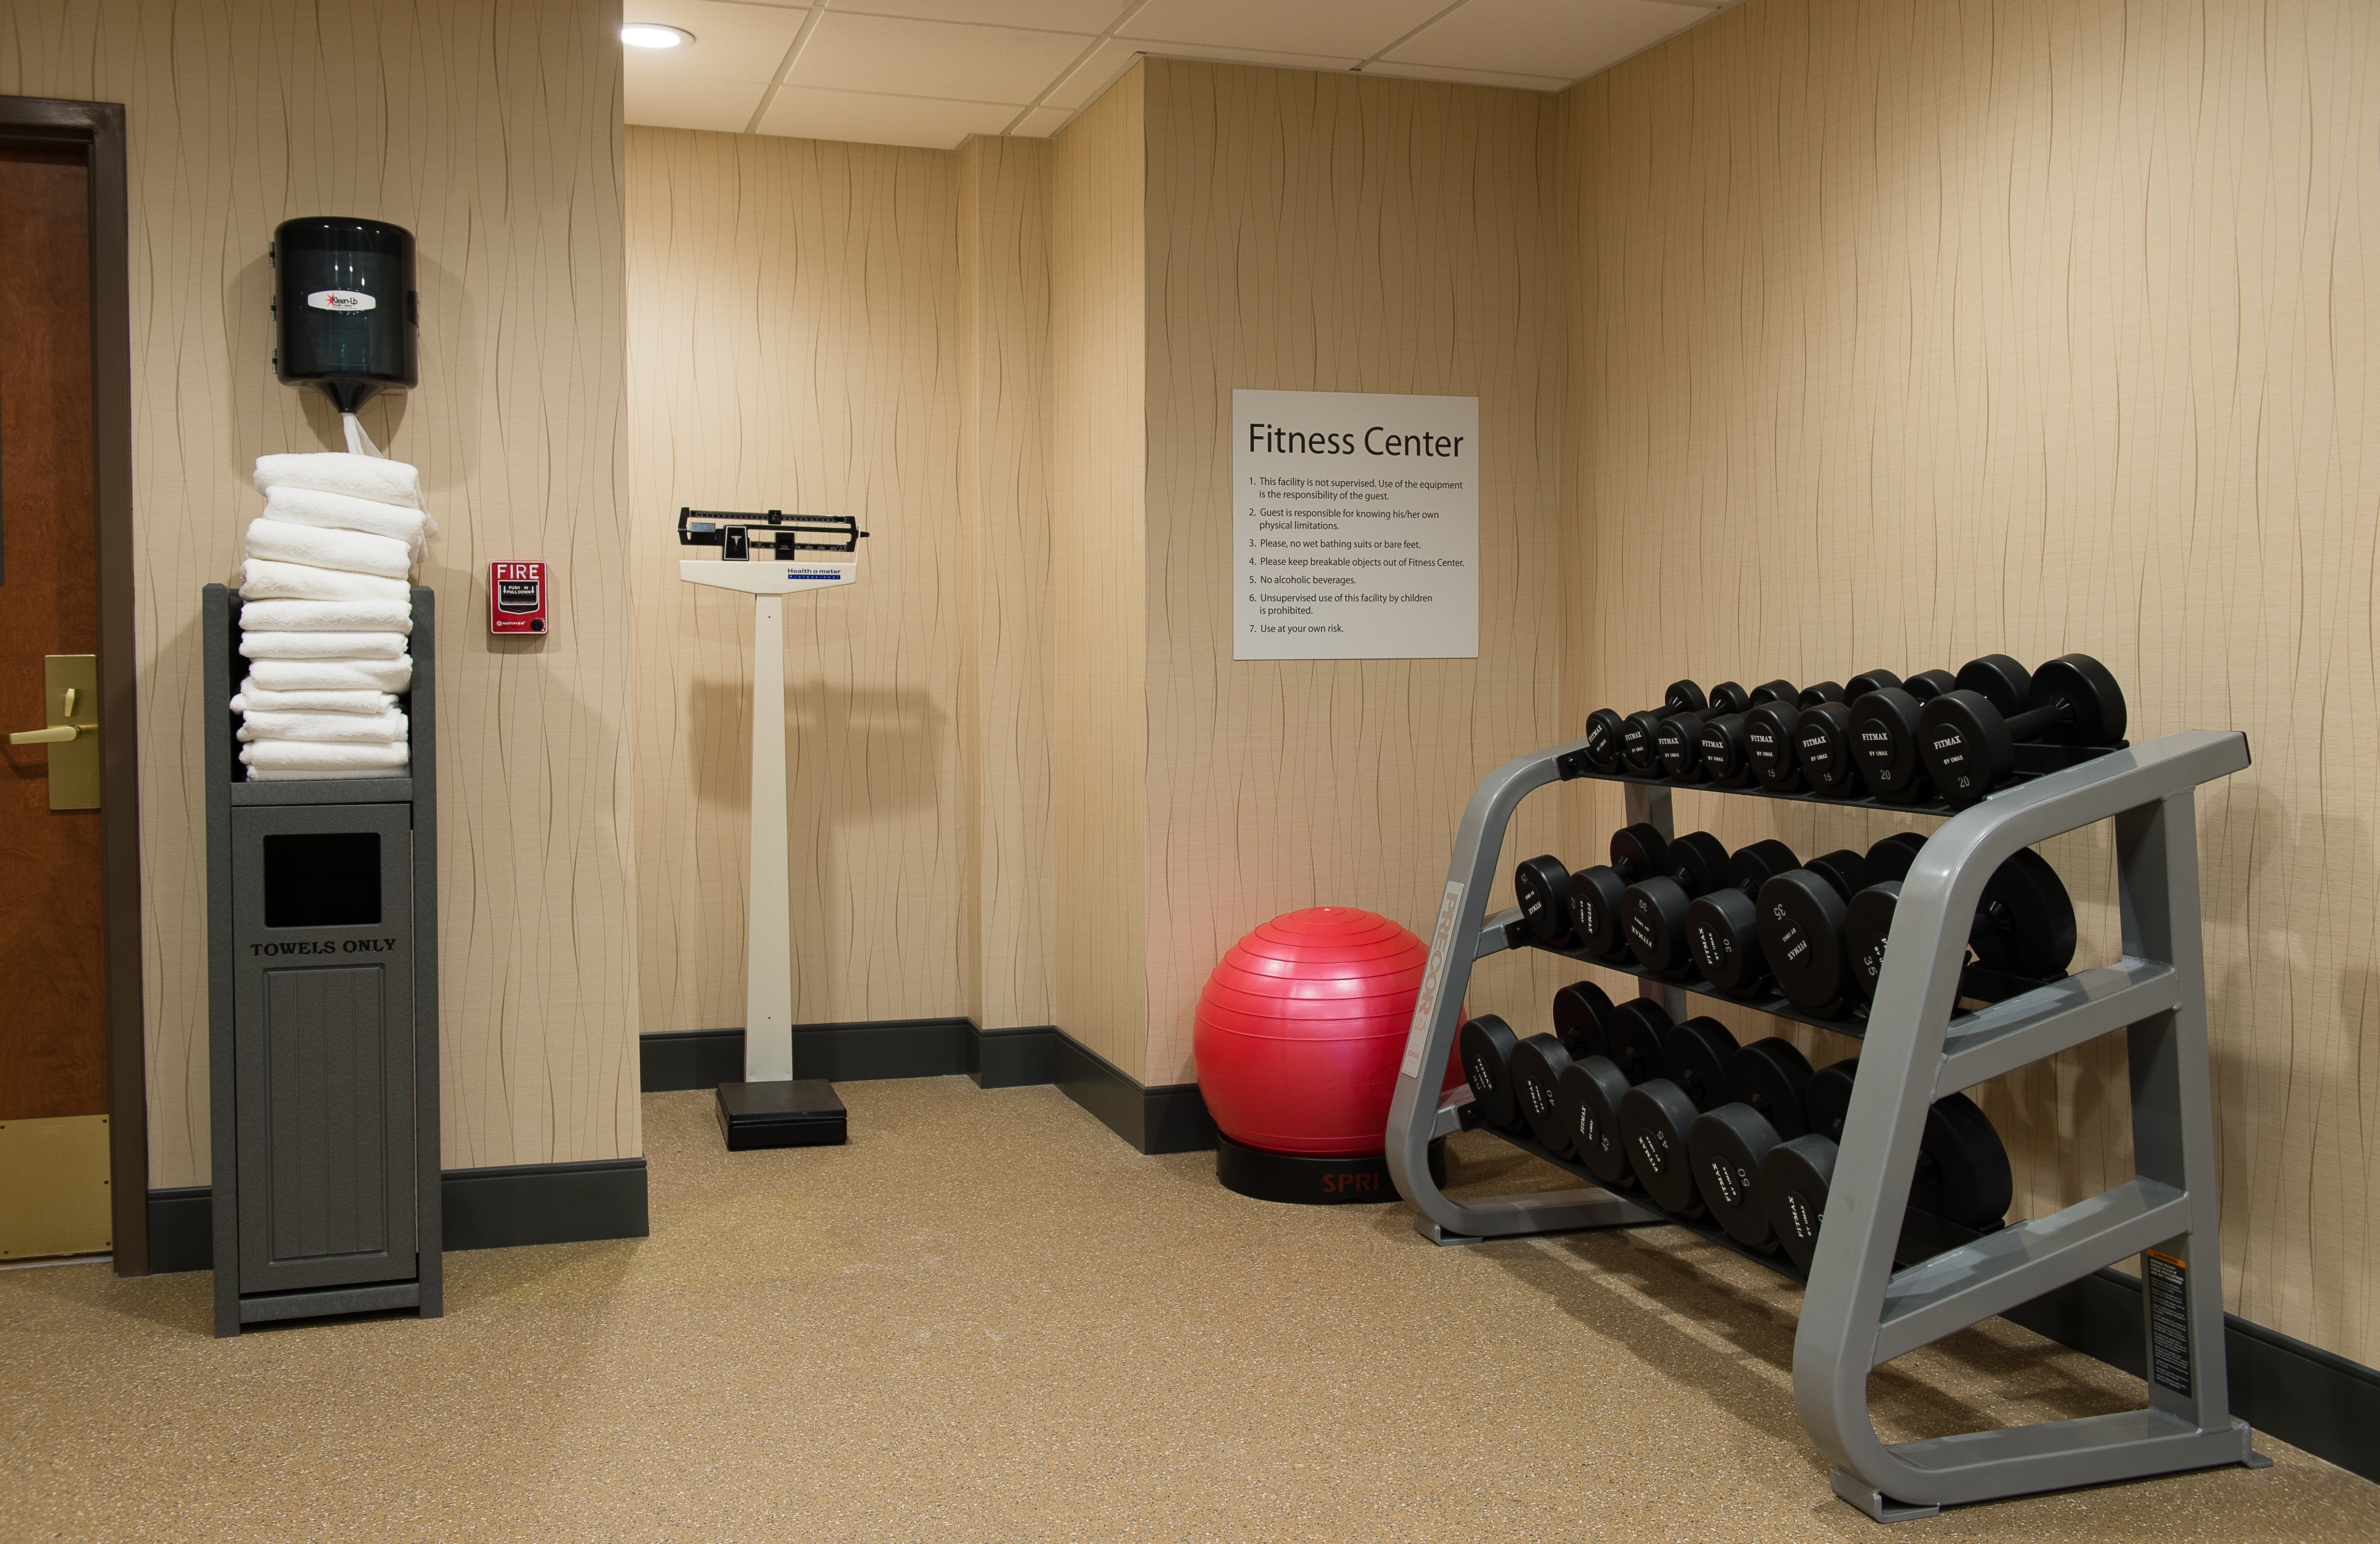 On-Site Fitness Center, complete with free weight set